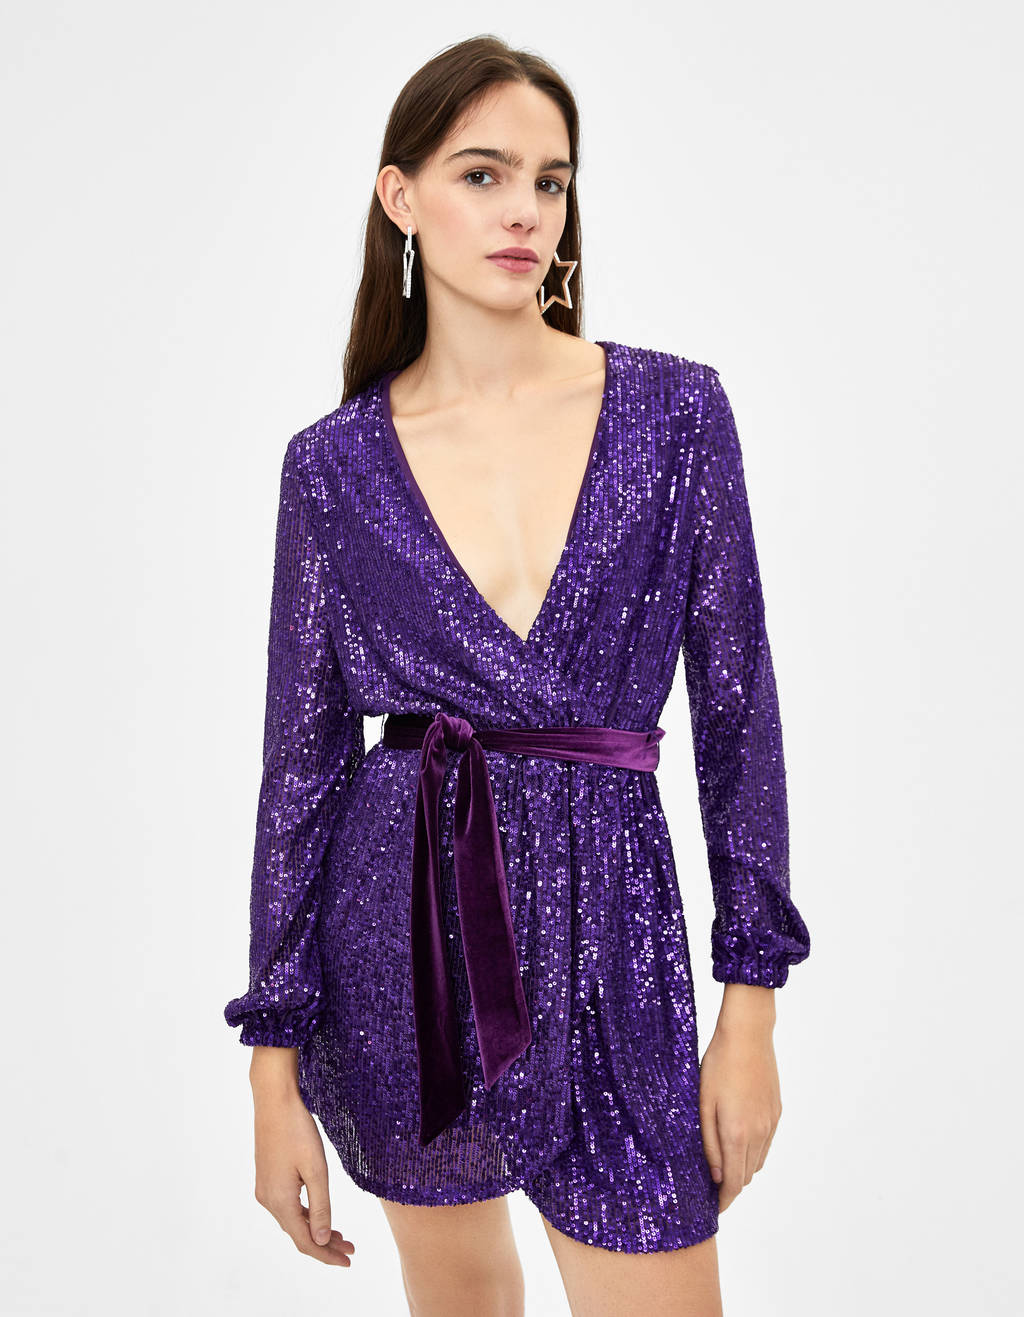 Meet the €40 violet Bershka dress that's perfect for a last minute ...